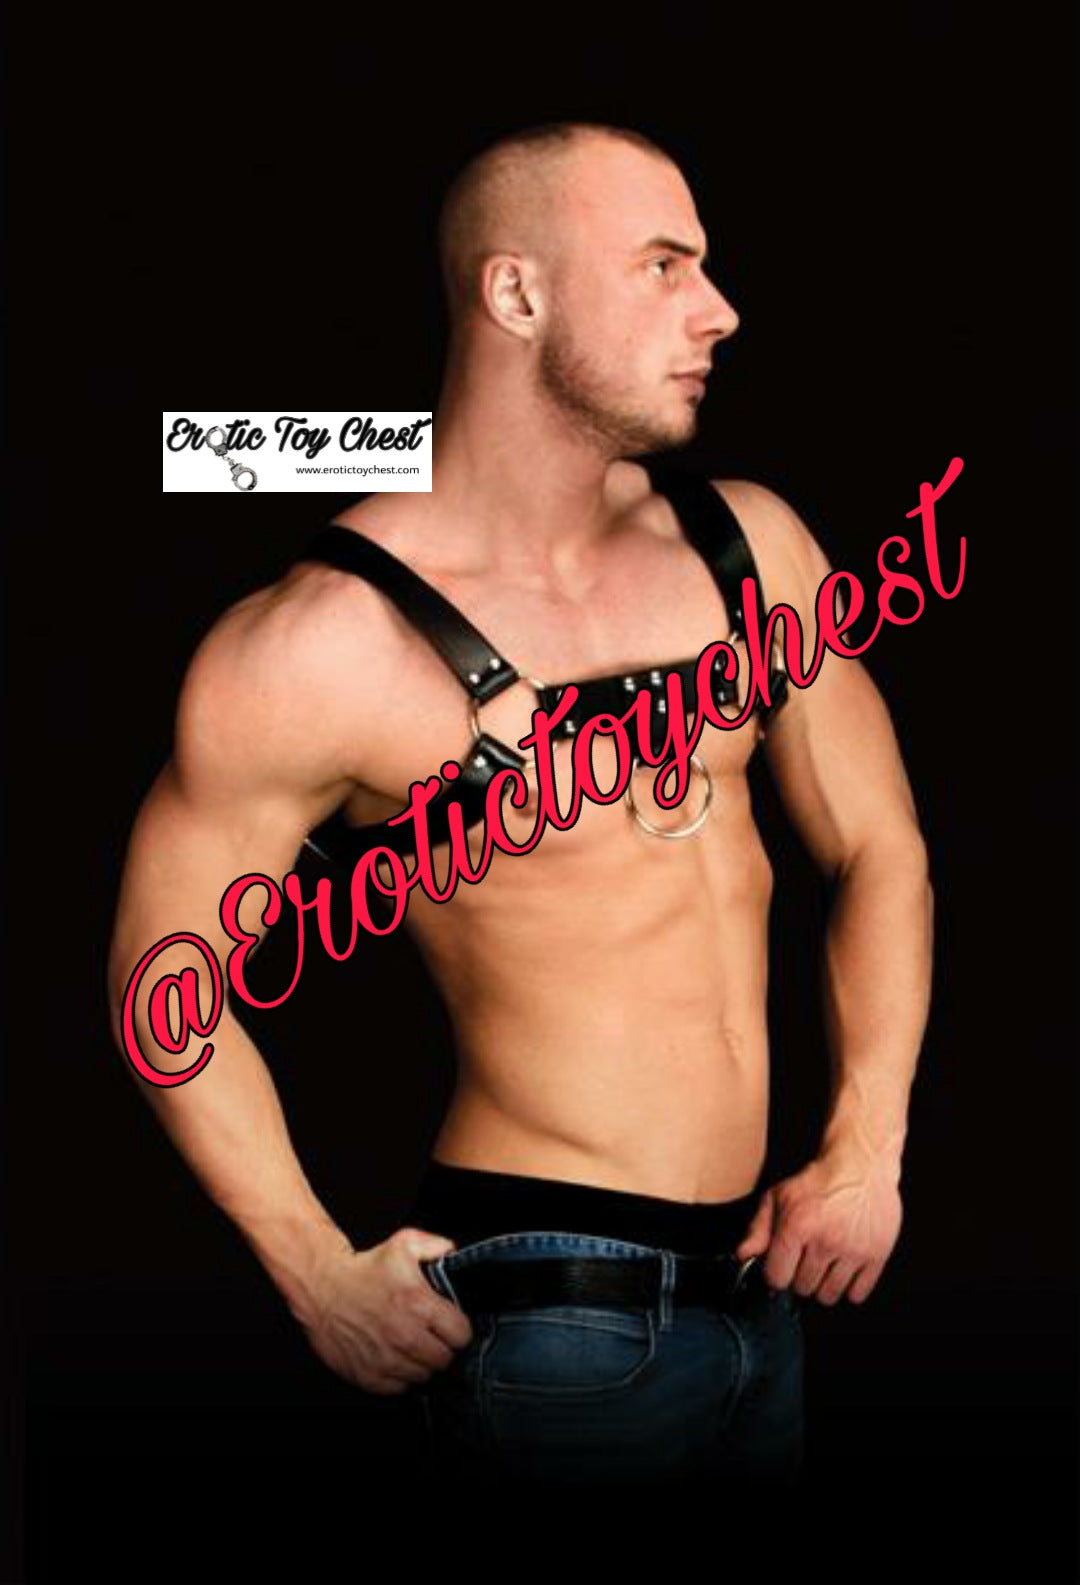 The Chest Body Harness